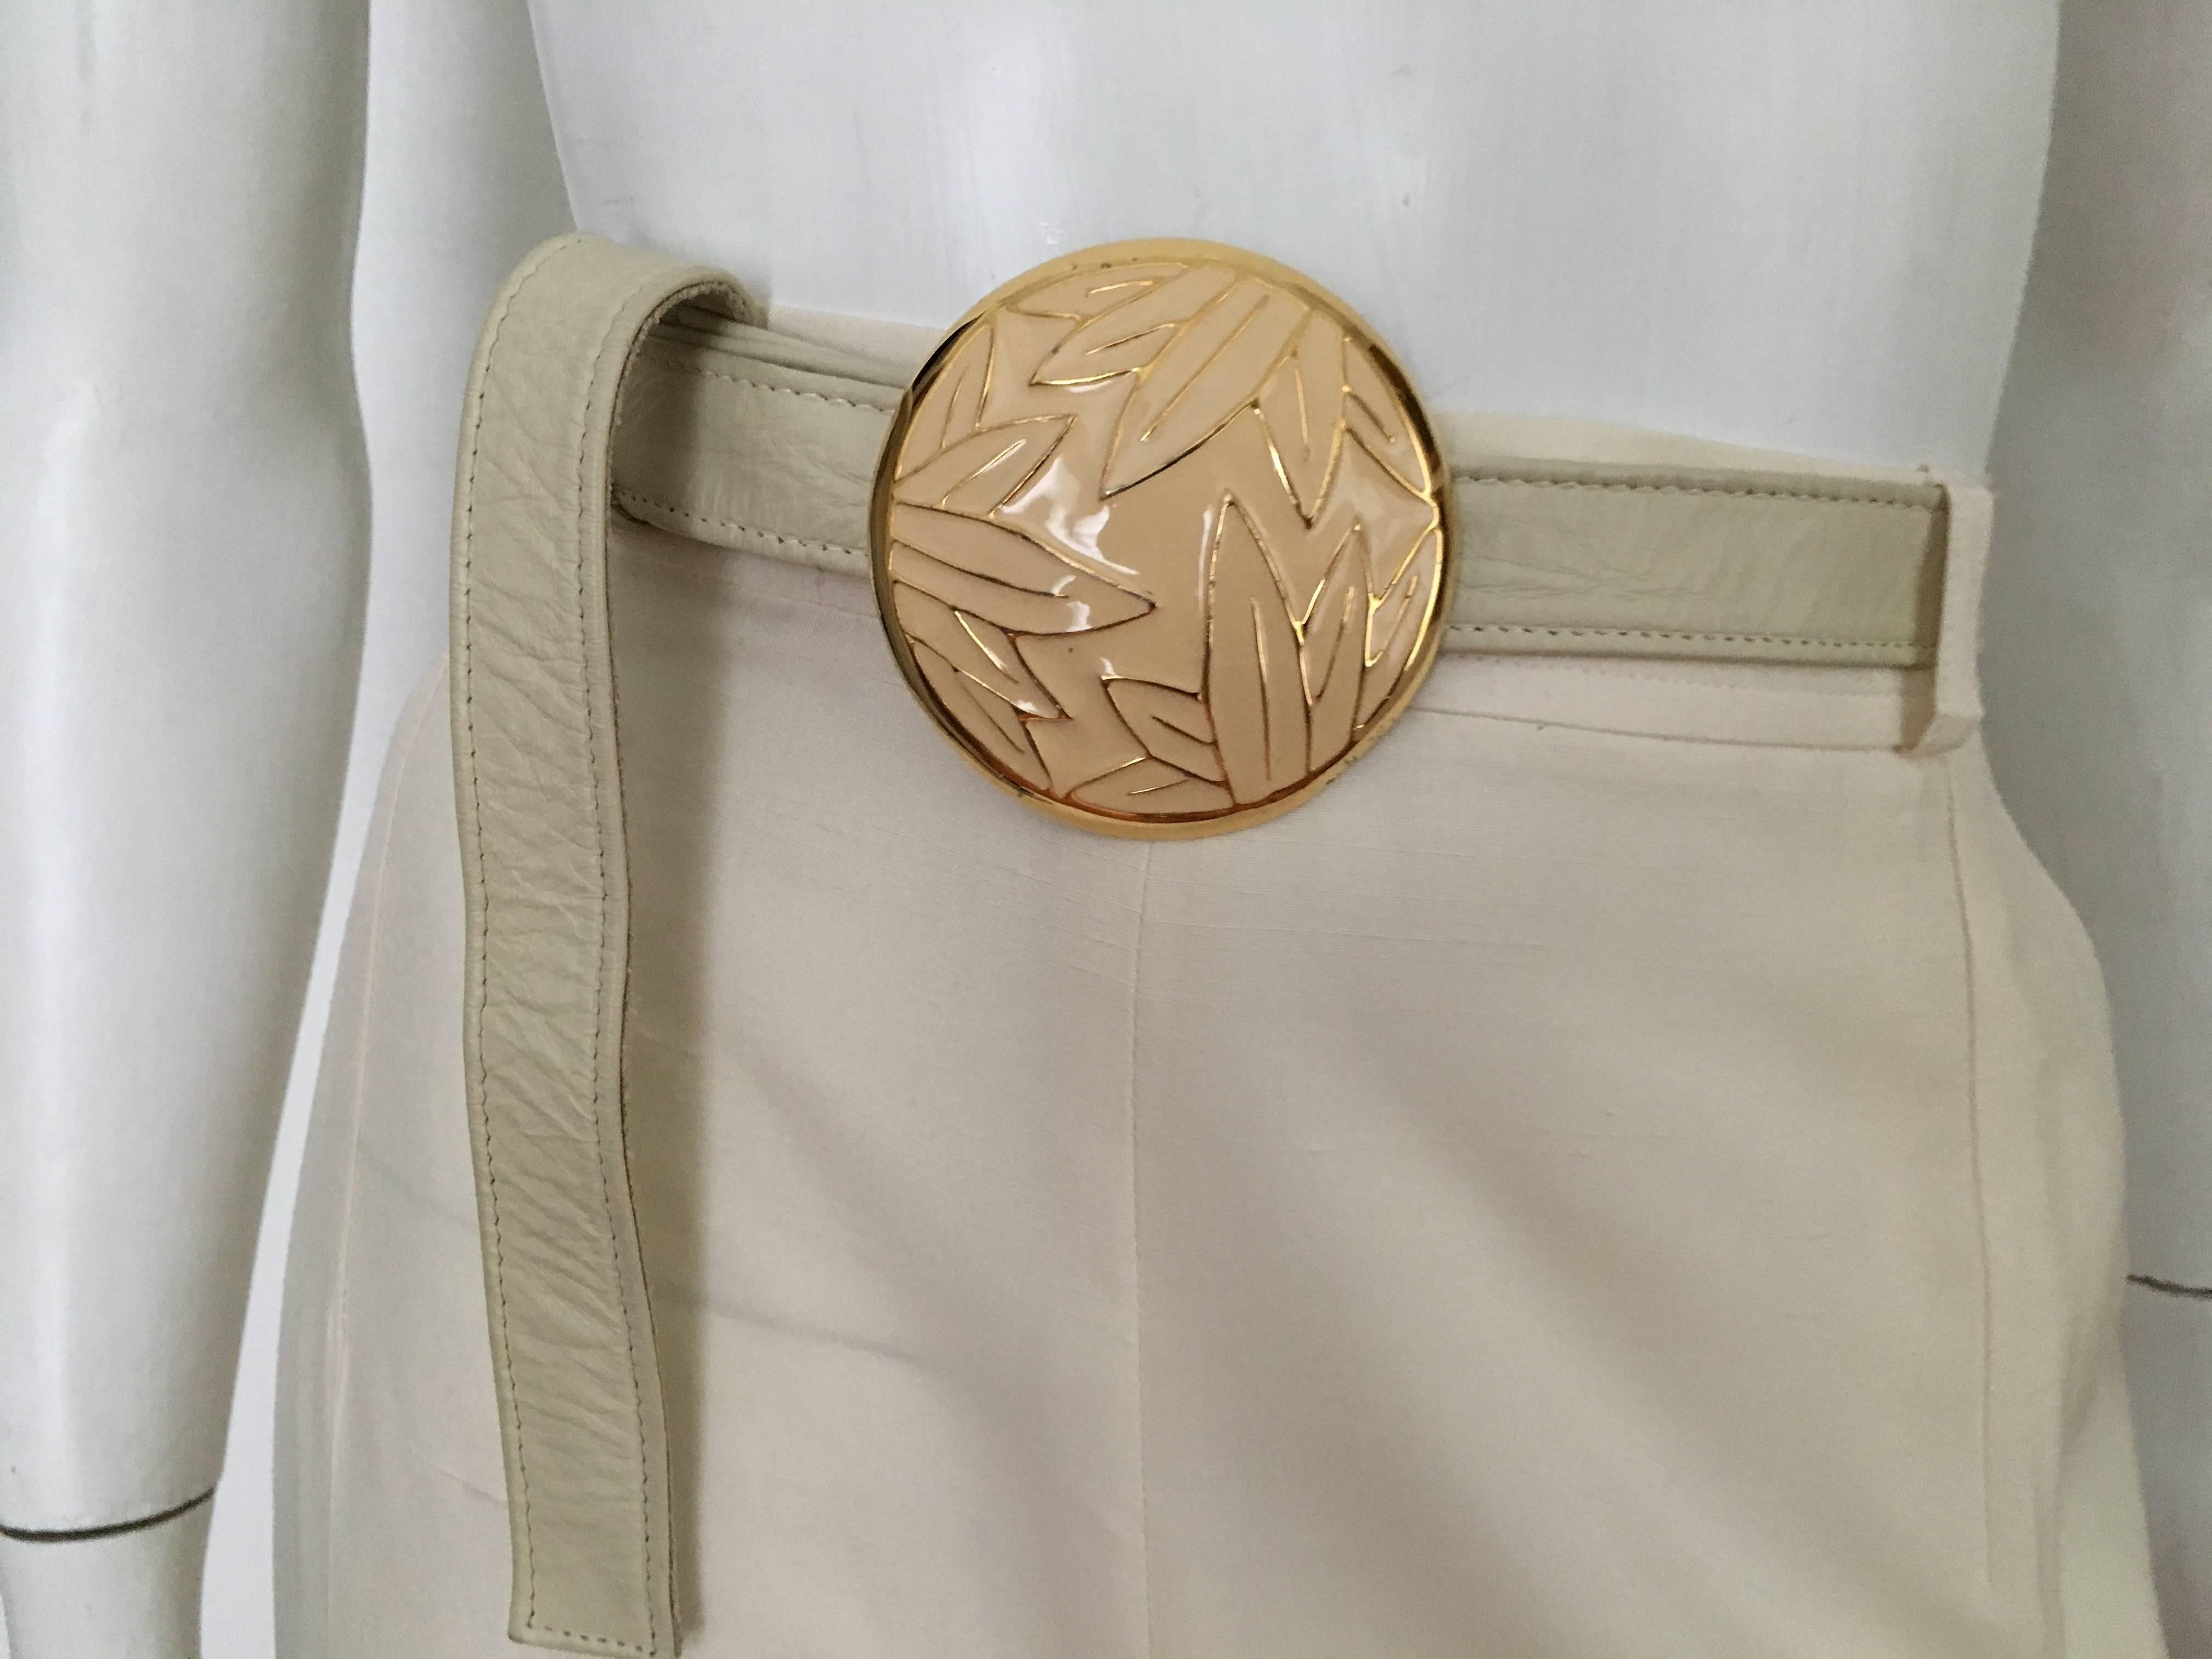 Alexis Kirk 1980s cream circle leaf pattern buckle with off white belt strap.  This nature theme belt is heavenly not to mention a fashion statement.  Alexis Kirk studied art under Walter Gropius at Harvard University, and also attended the Rhode